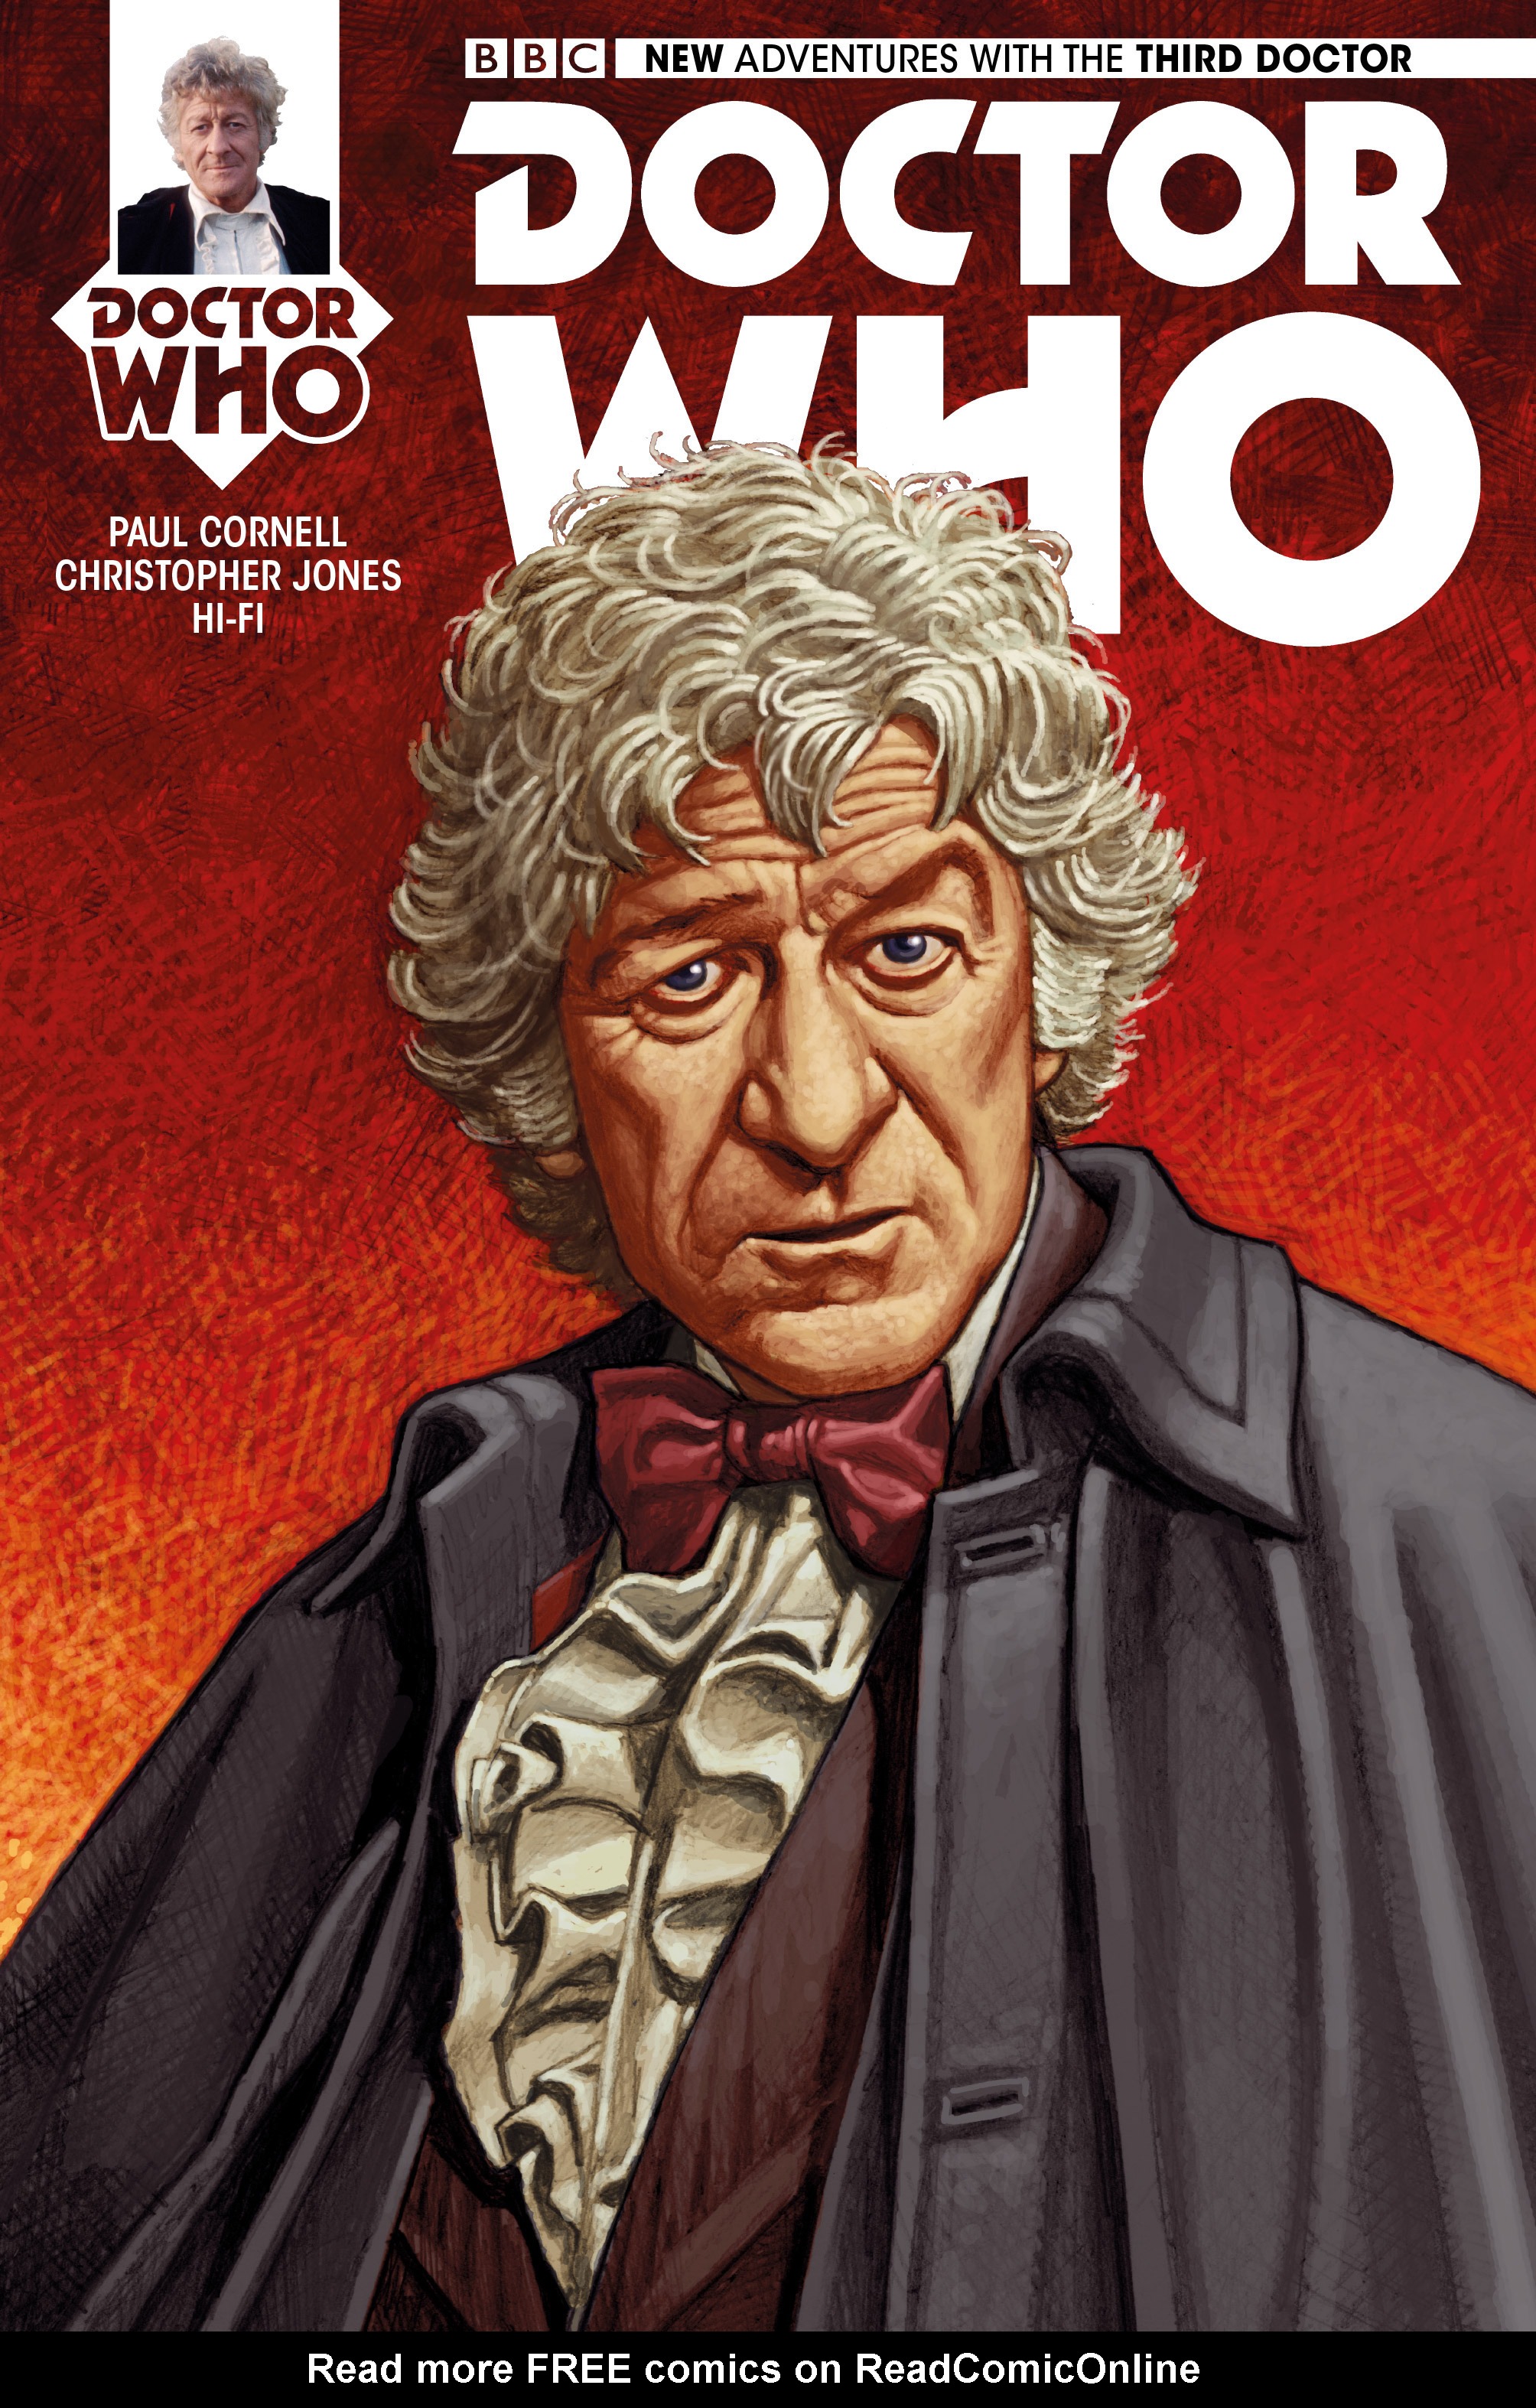 Read online Doctor Who: The Third Doctor comic -  Issue #1 - 4